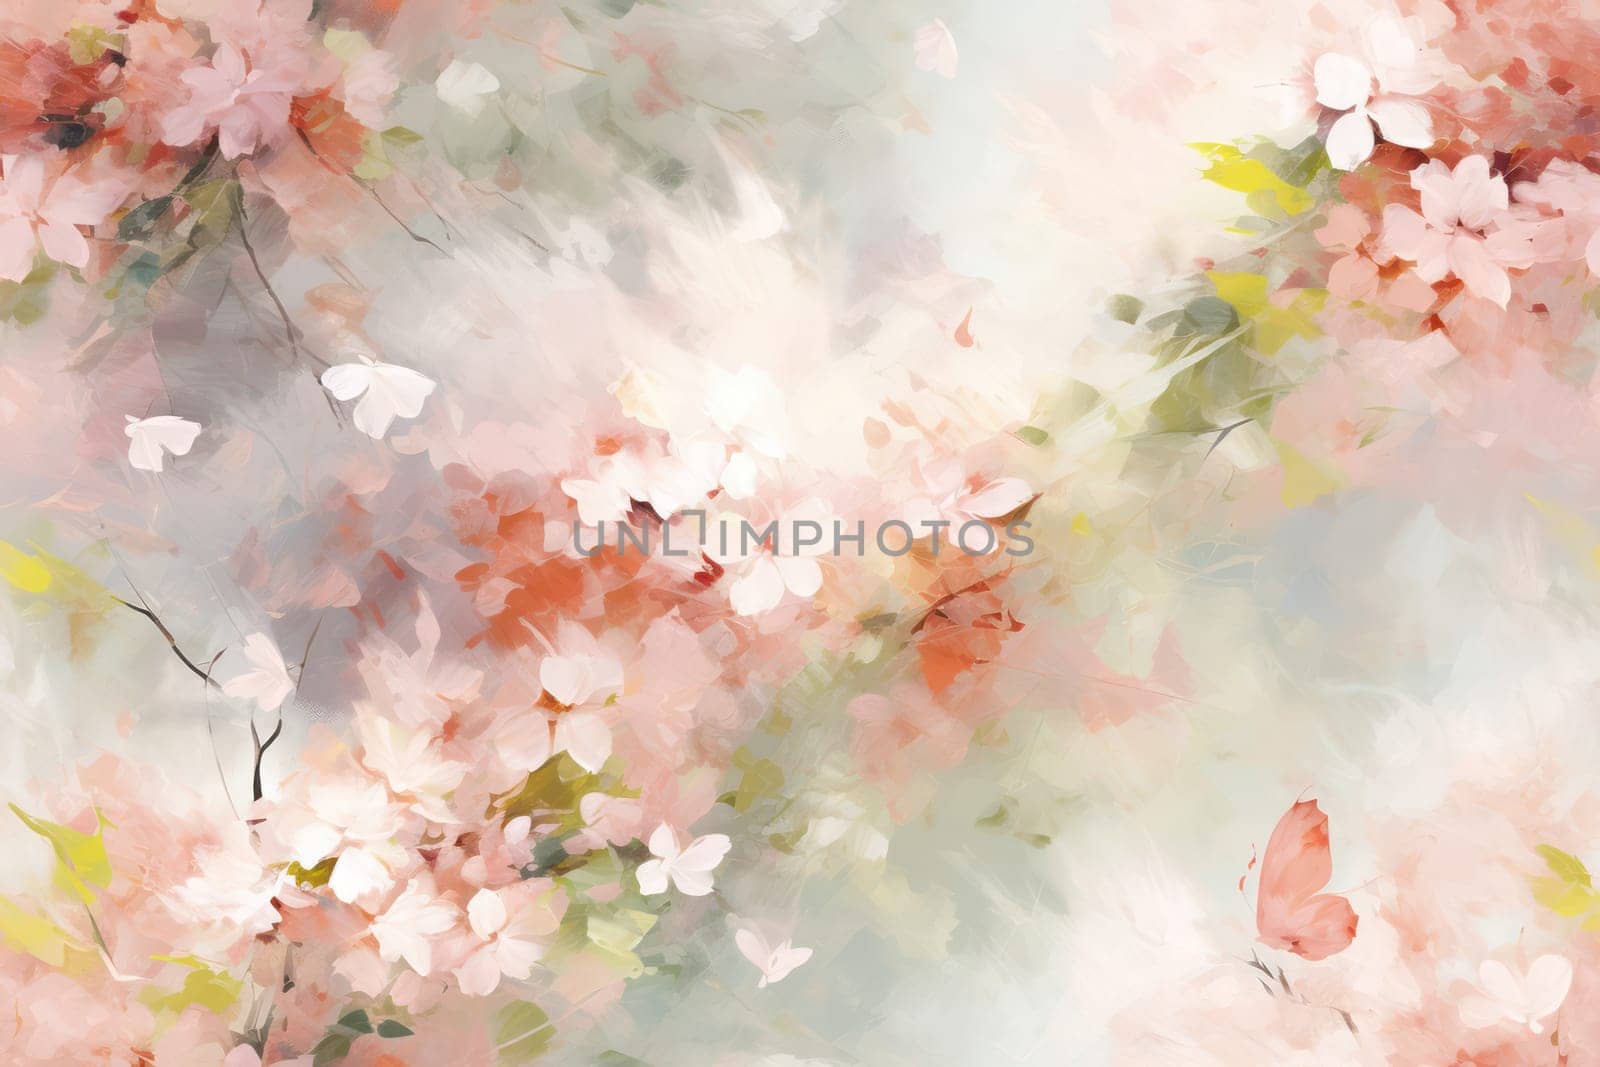 Abstract Watercolor Floral Painting: A Vibrant Blossom Bouquet on a Soft Pastel Pink and Blue Grunge Background.